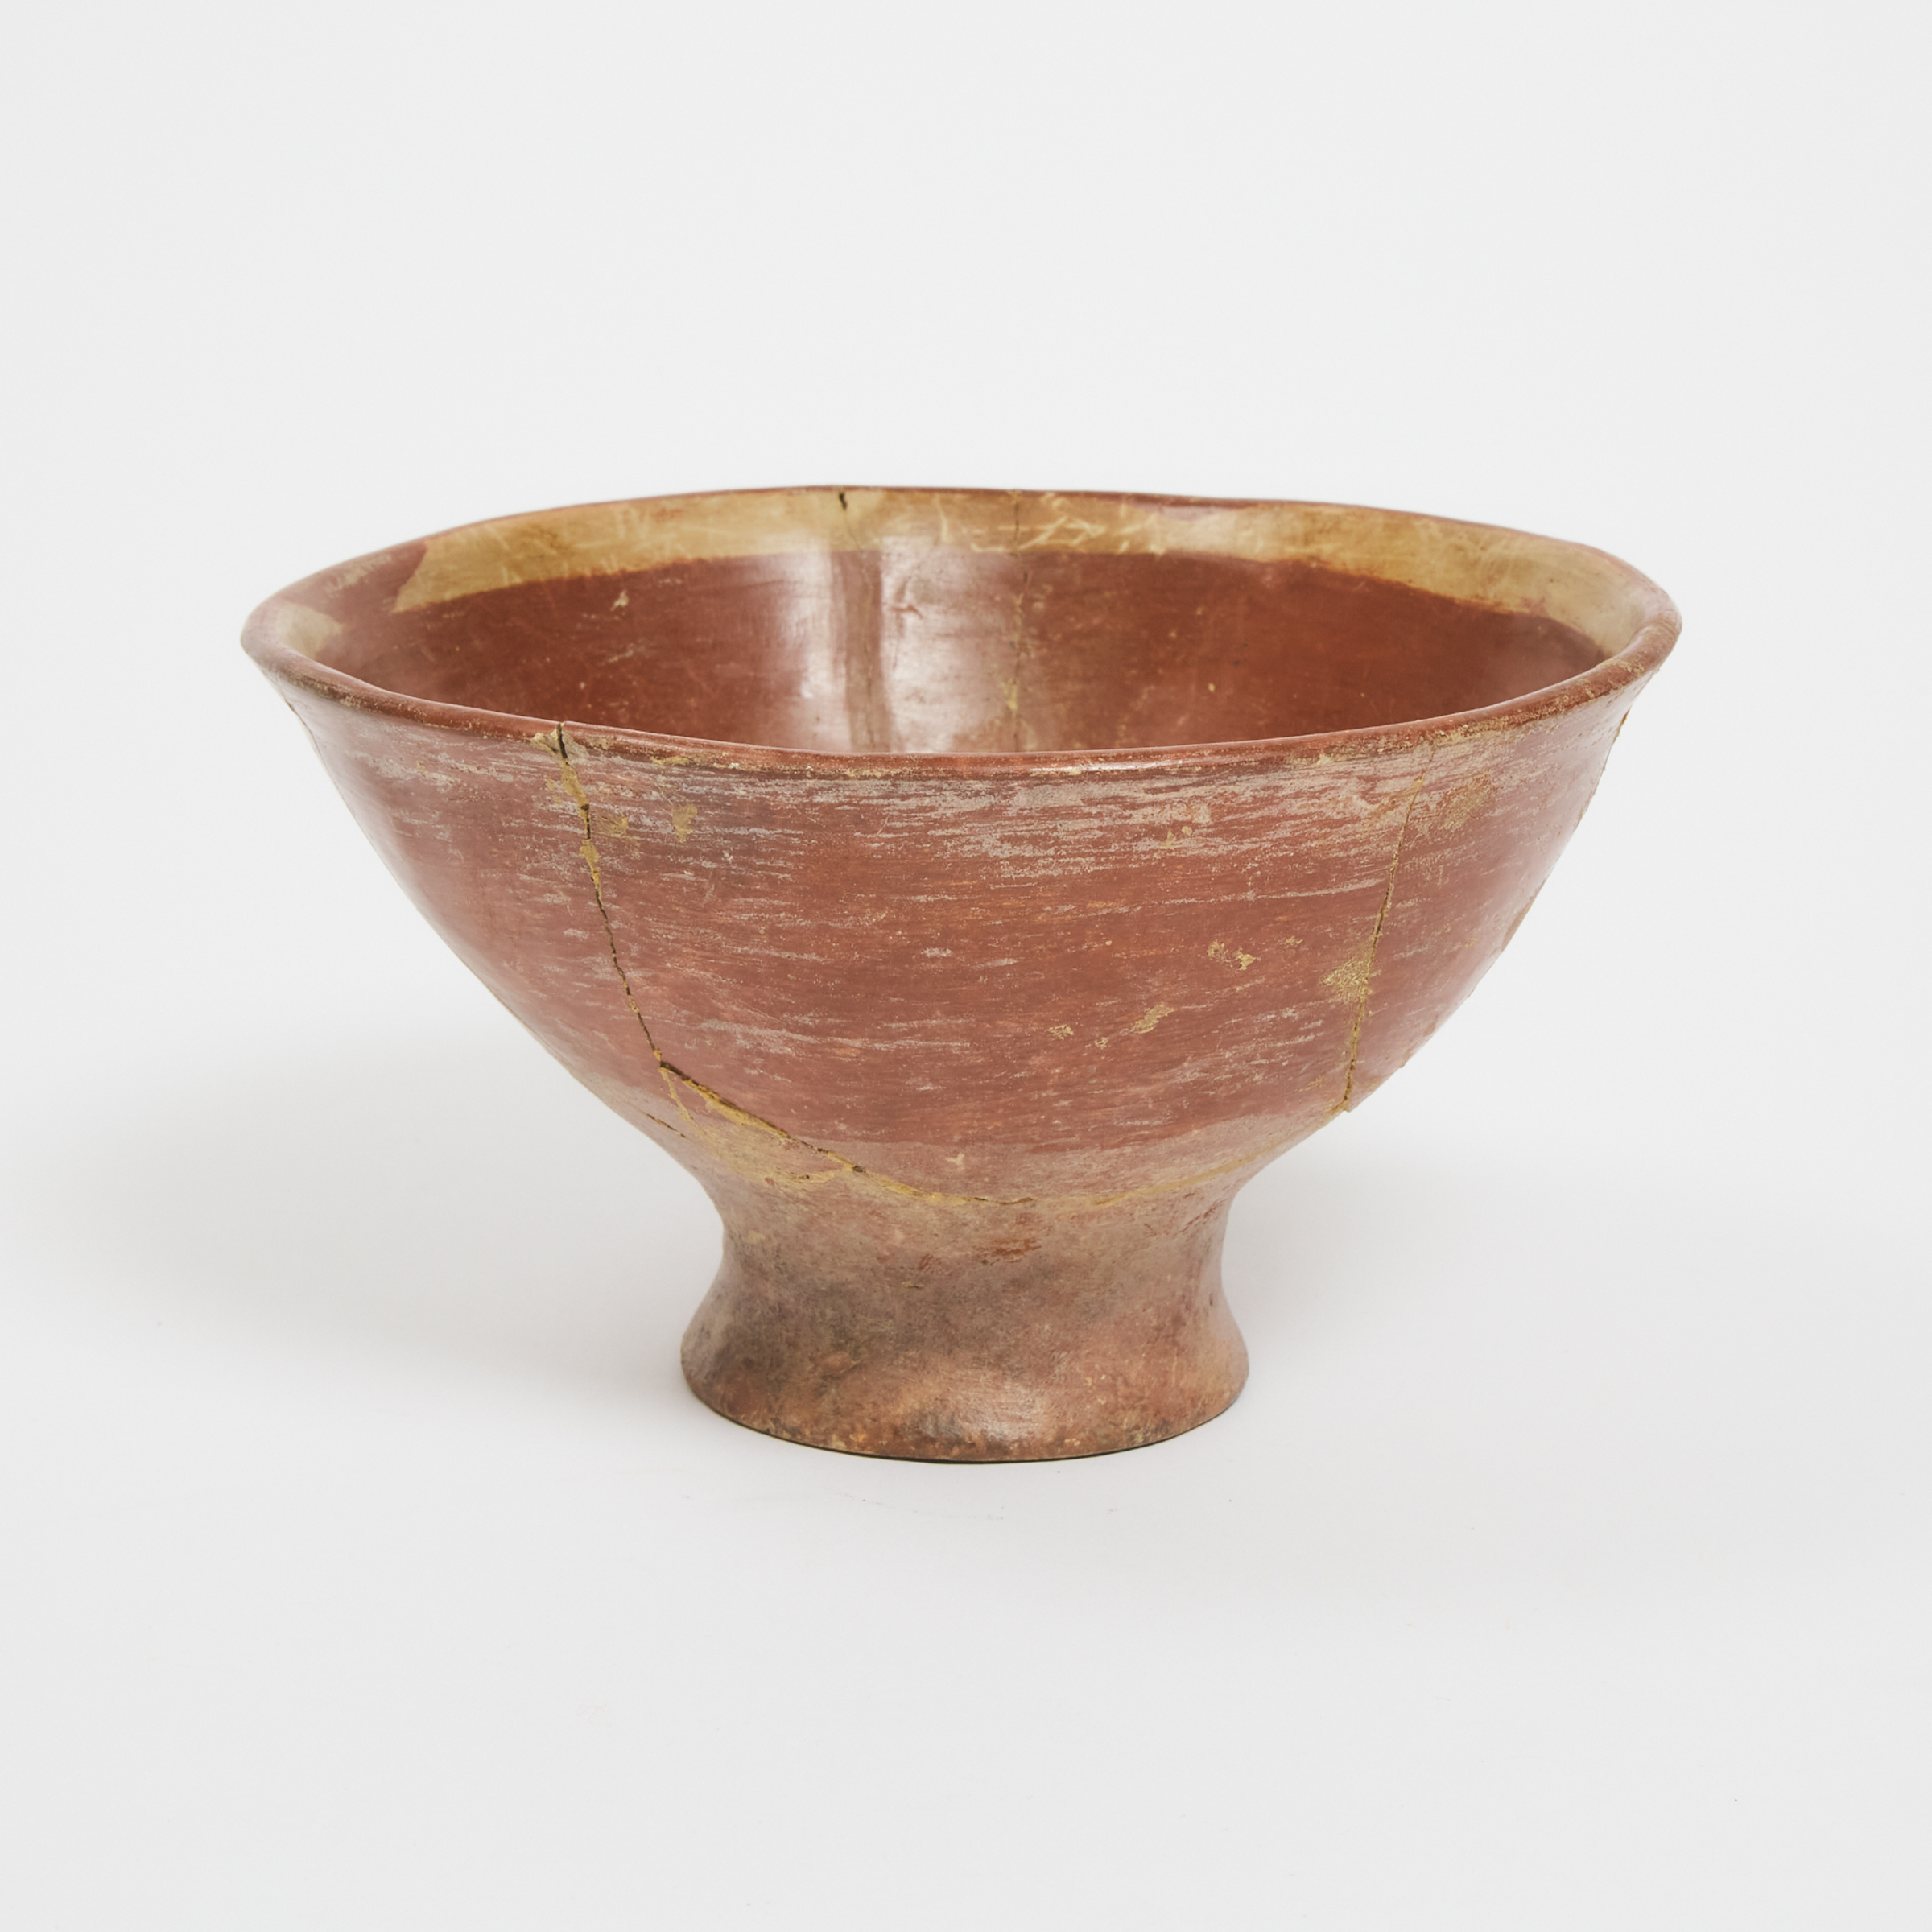 Nariño Red Slip Pottery Footed